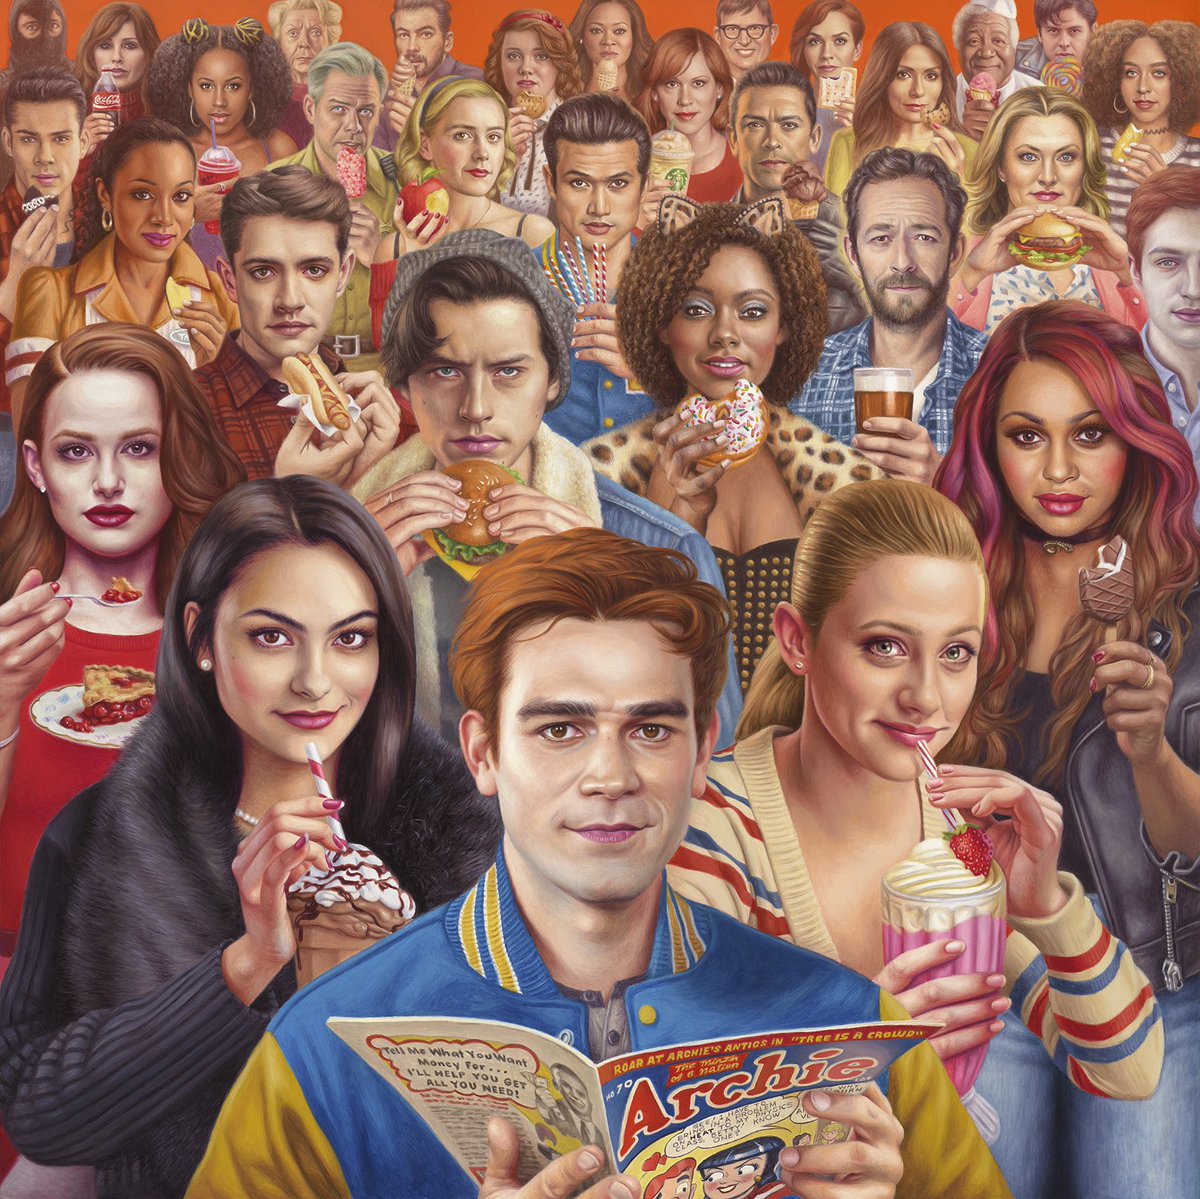 @WriterRAS “Riverdale,” oil on canvas, 36 x 36 inches. in celebration of seven great seasons of the Riverdale show! huge thanks to Roberto for making this possible! #Riverdale